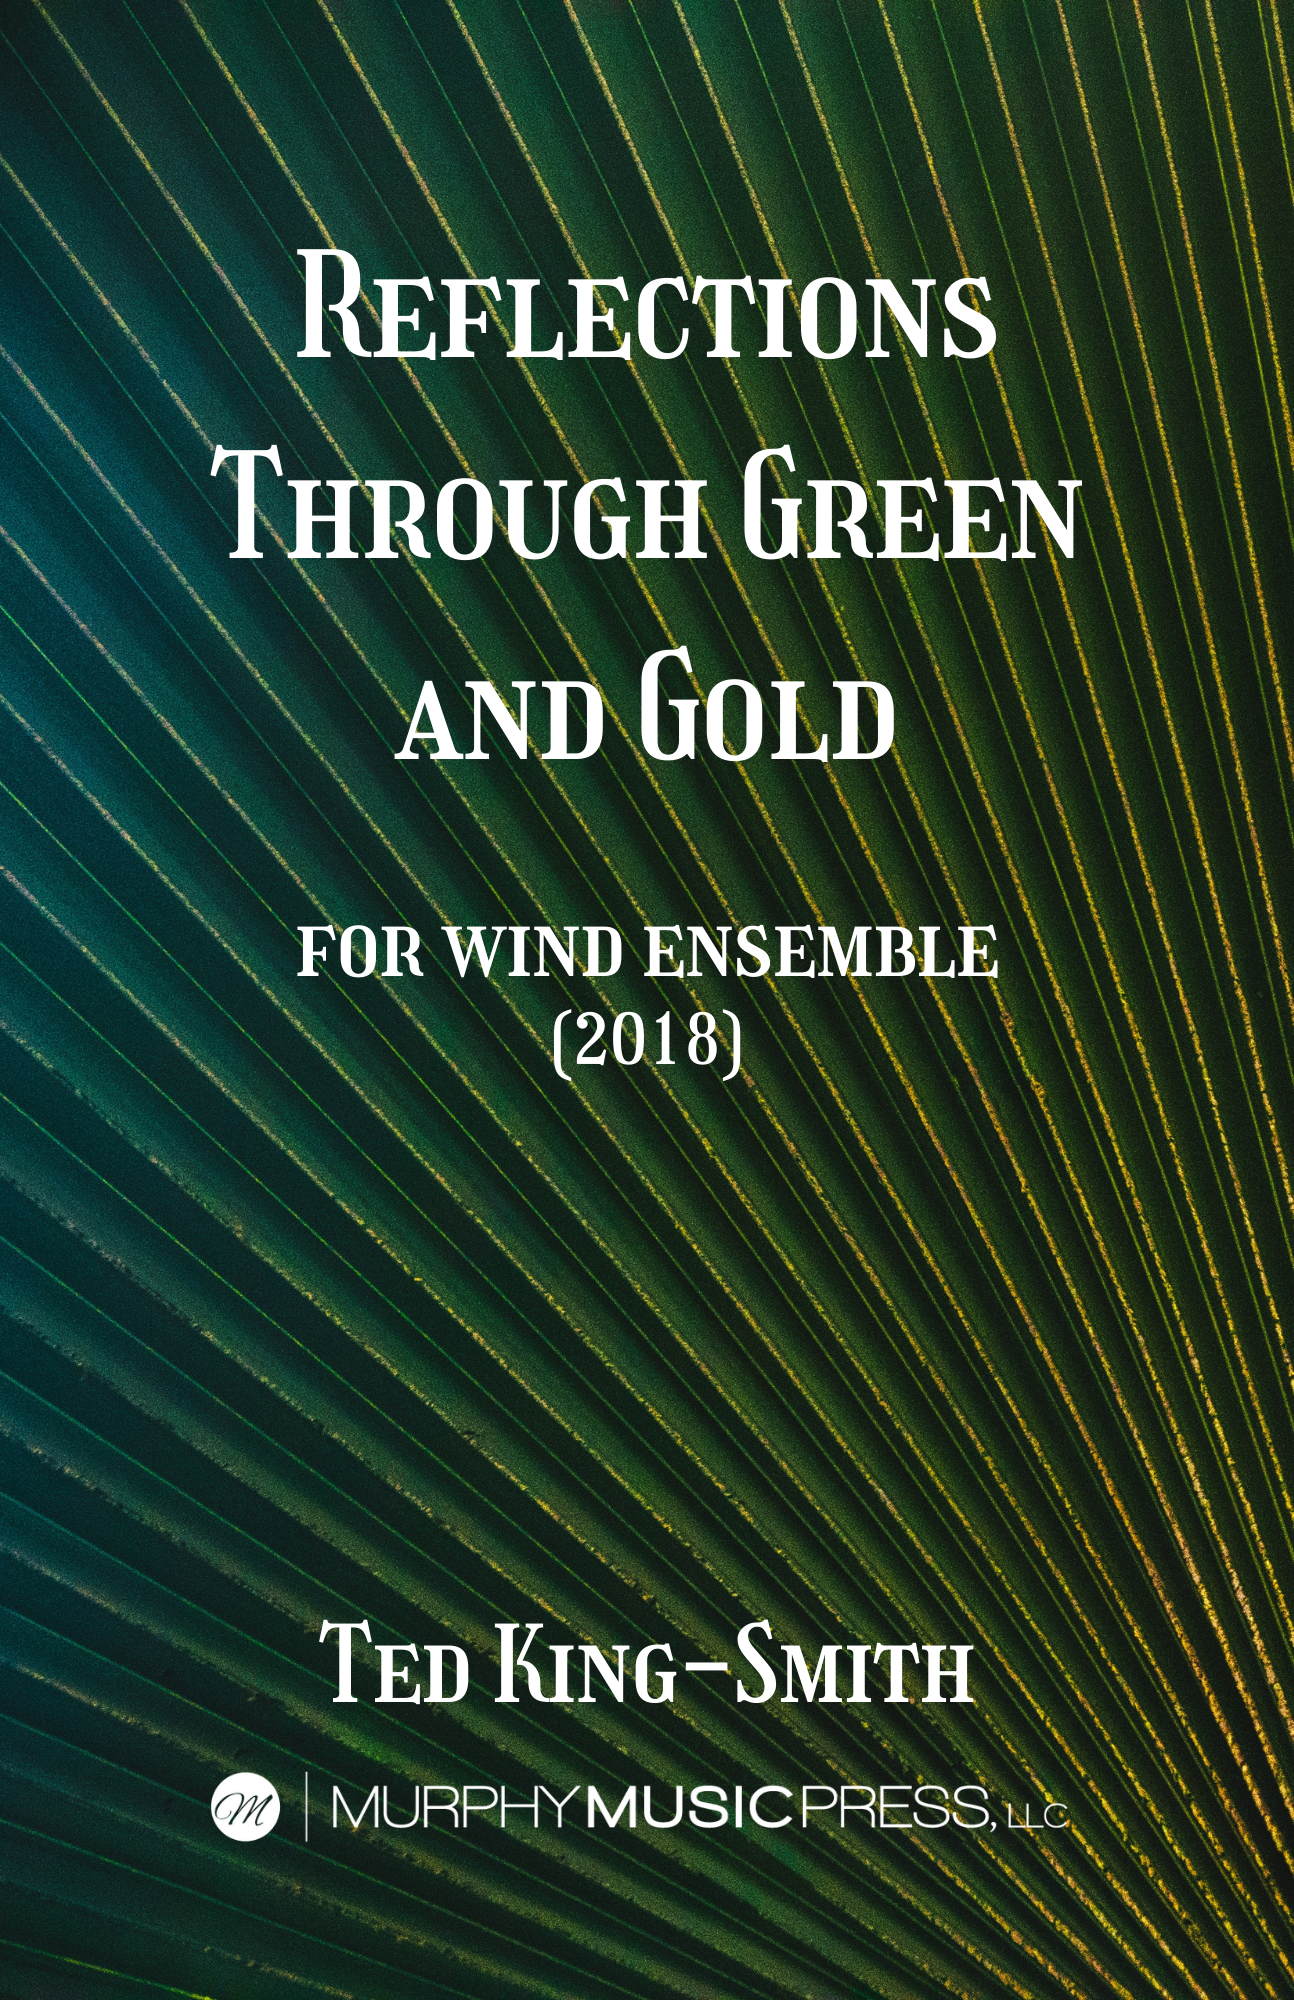 Reflections Through Green And Gold by Ted King-Smith